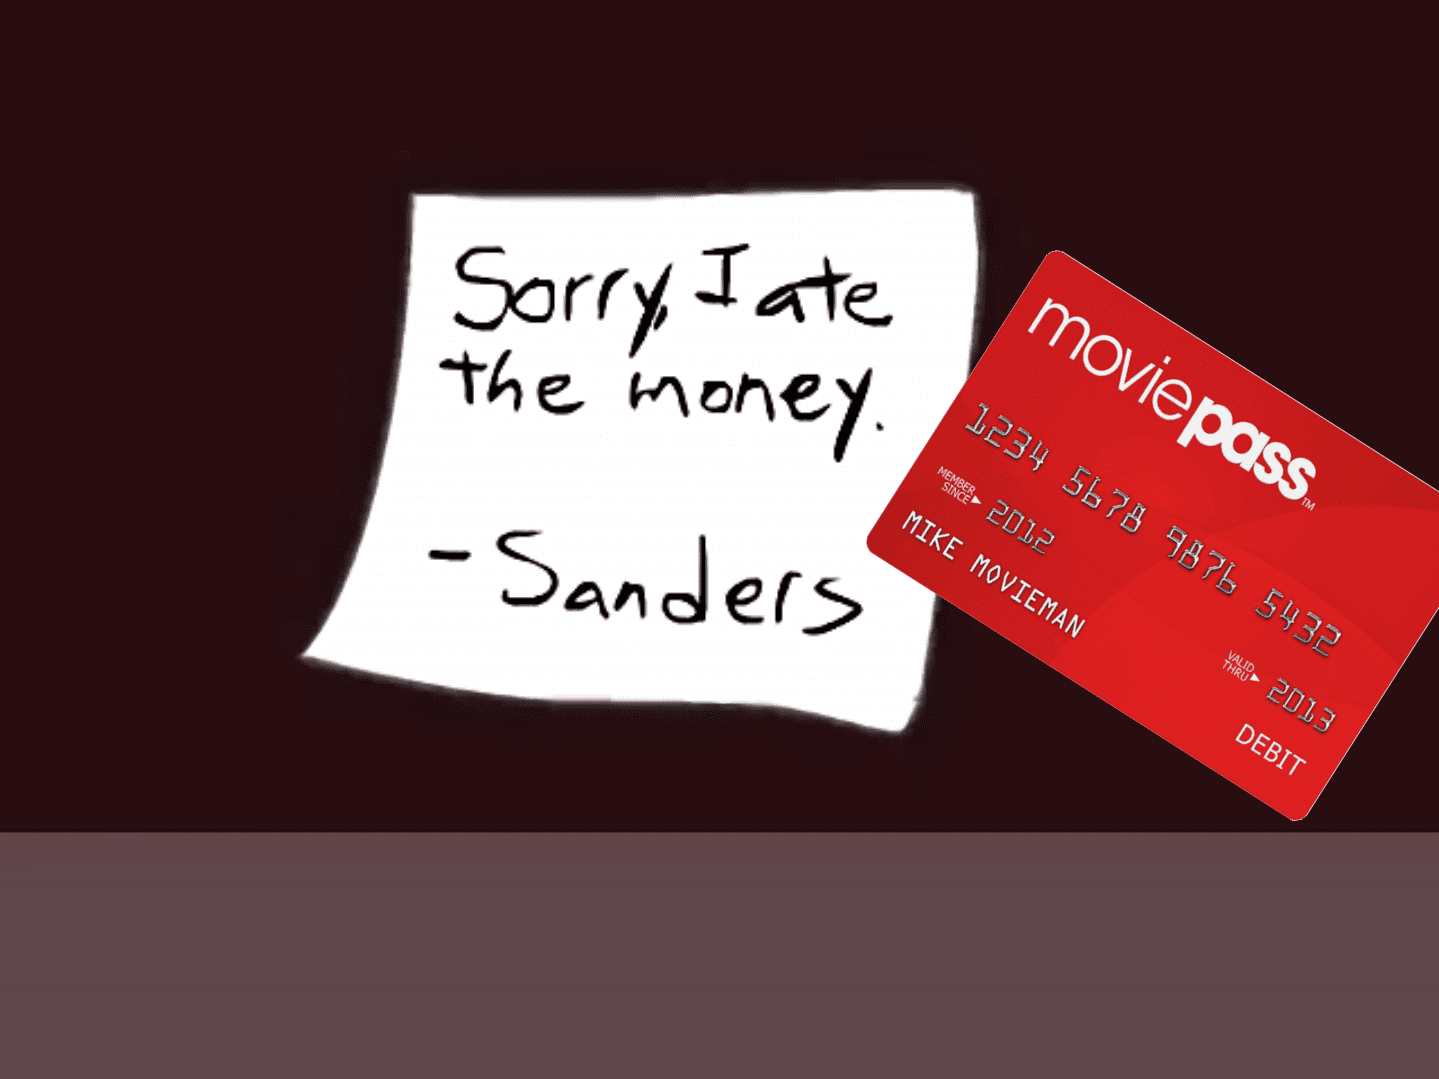 MoviePass Ran Out Of Money